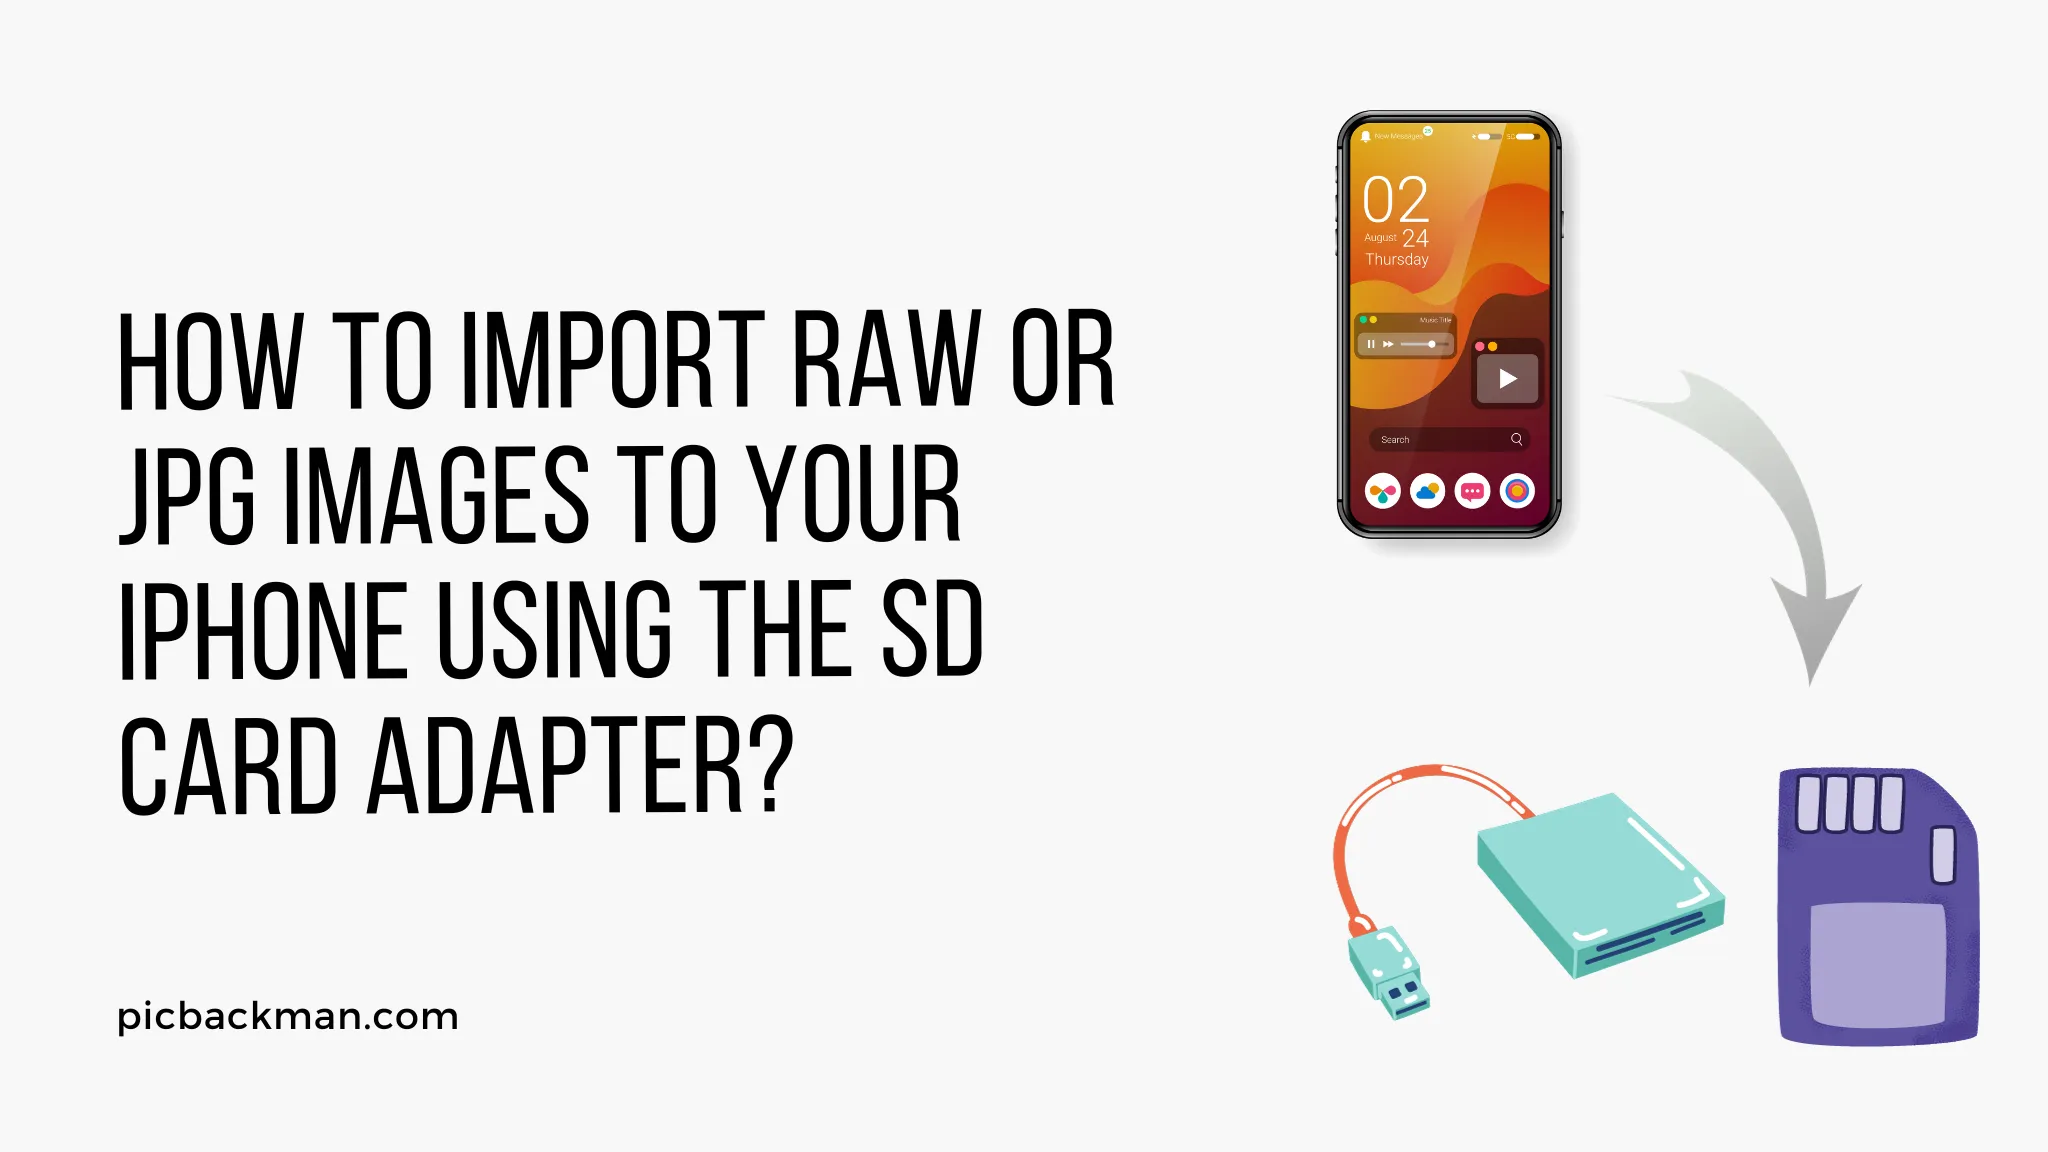 How to import RAW or JPG images to your iPhone using the SD card adapter?